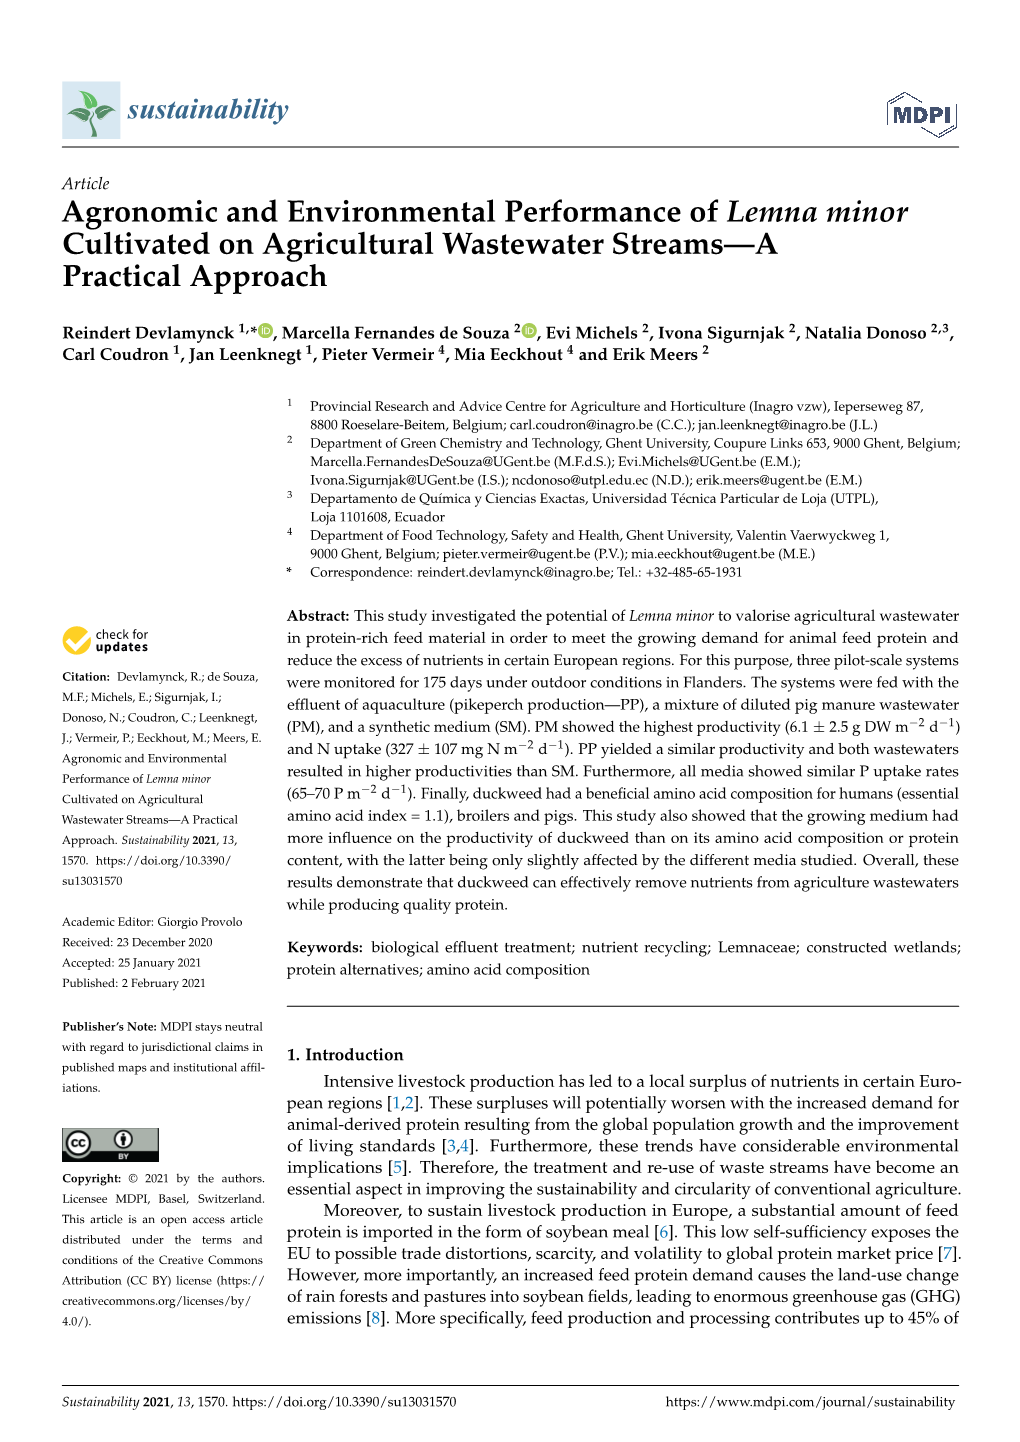 Agronomic and Environmental Performance of Lemna Minor Cultivated on Agricultural Wastewater Streams—A Practical Approach